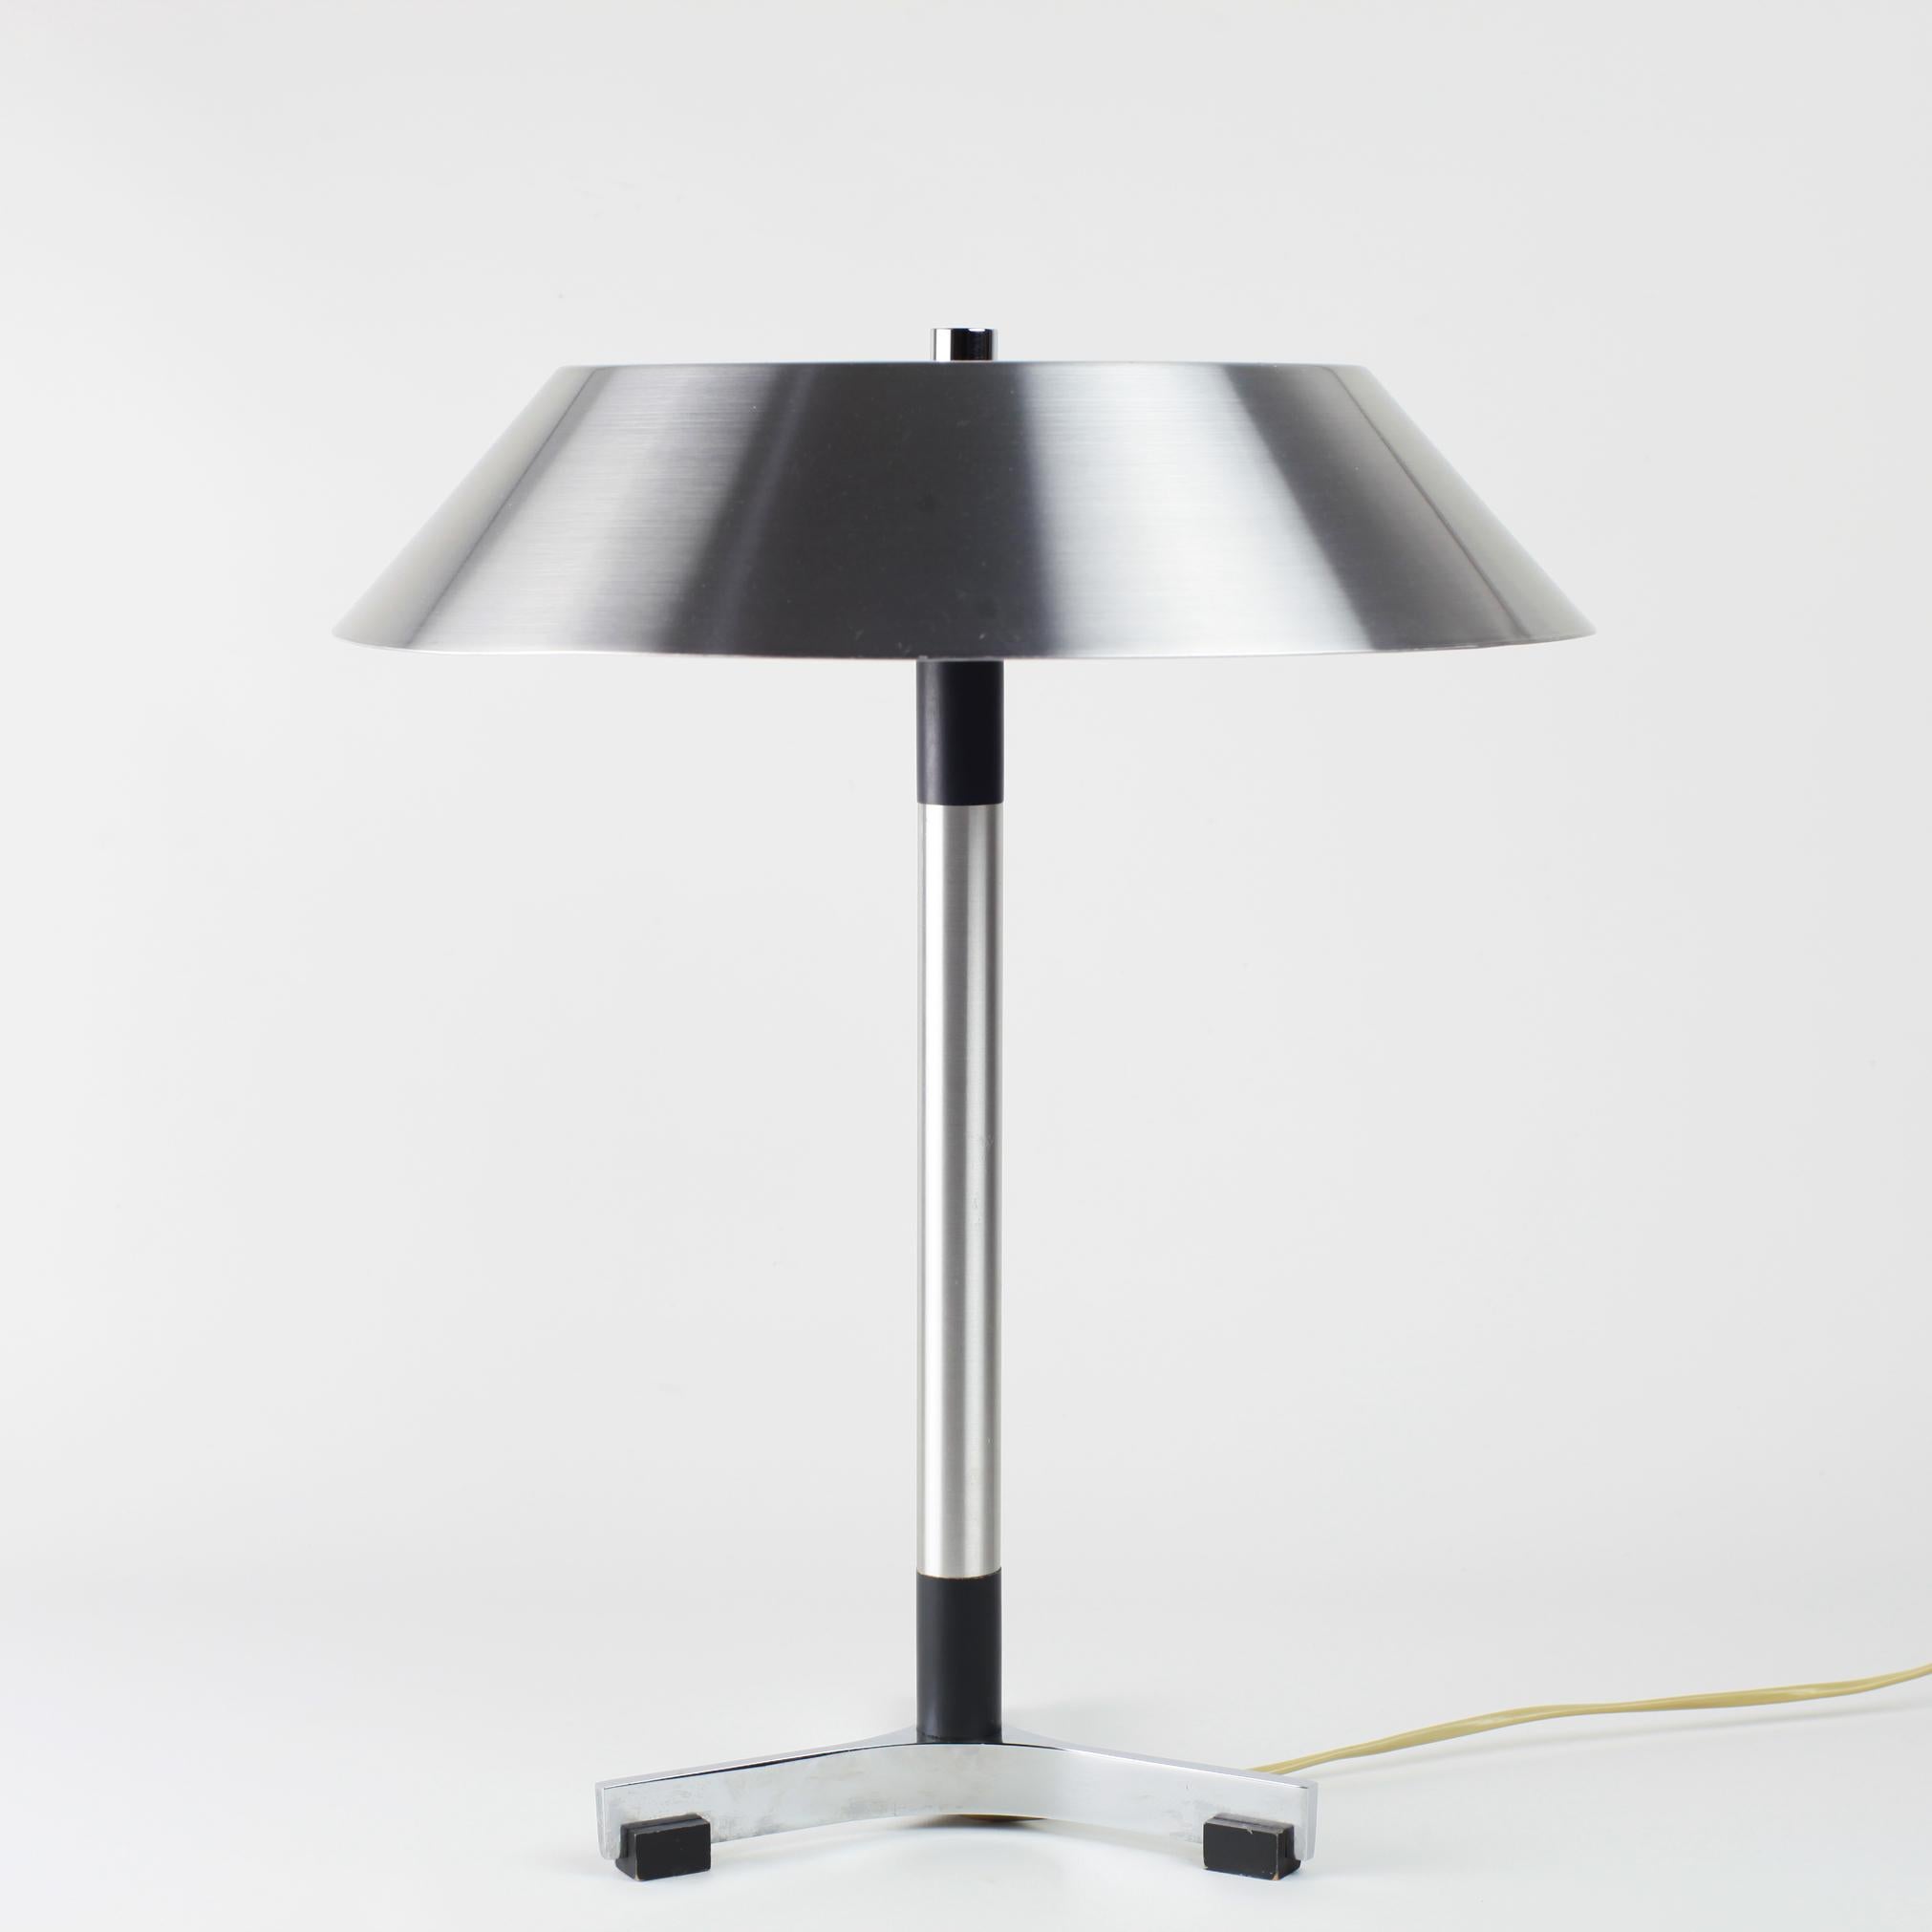 An iconic 1960s danish design, the President desk lamp by Jo Hammerborg for Fog & Mørup.
Aluminium shade and chromed and black wood Stand. 
Very good vintage condition with some signs of use as expected.

Measures : H 44 cm - W 37 cm
2 E27